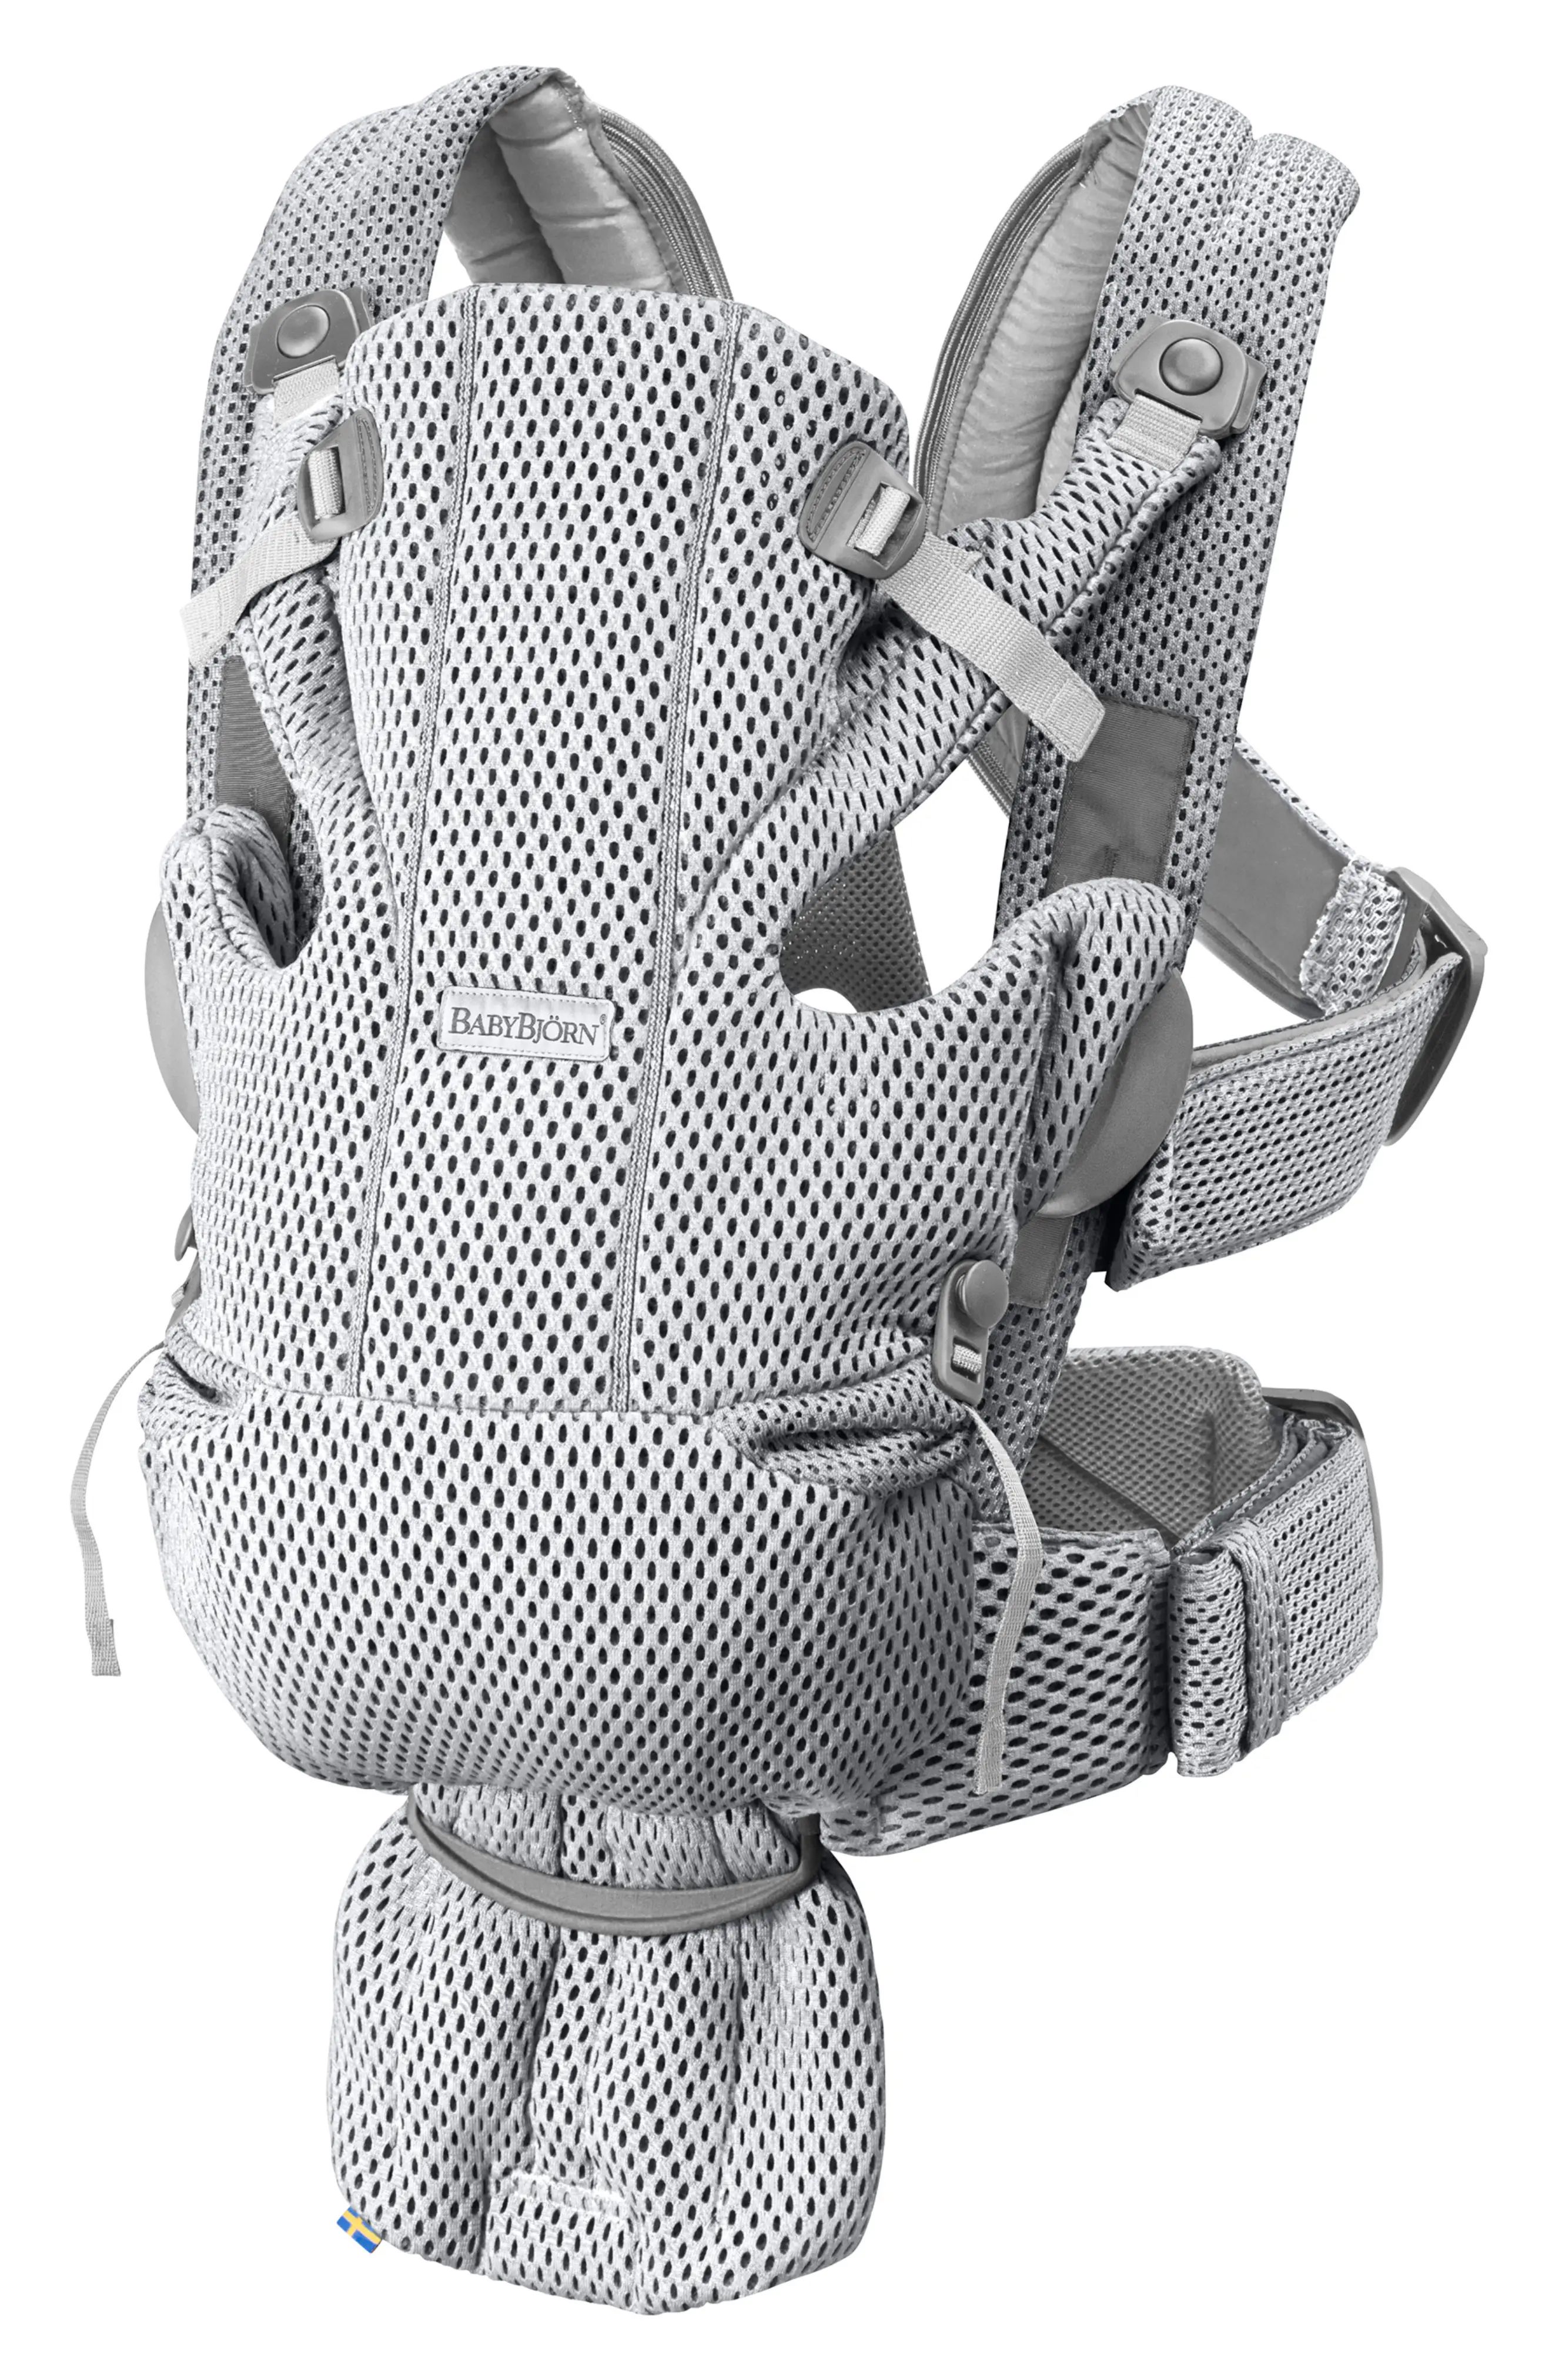 BabyBjorn Baby Carrier Free in Grey at Nordstrom | Nordstrom